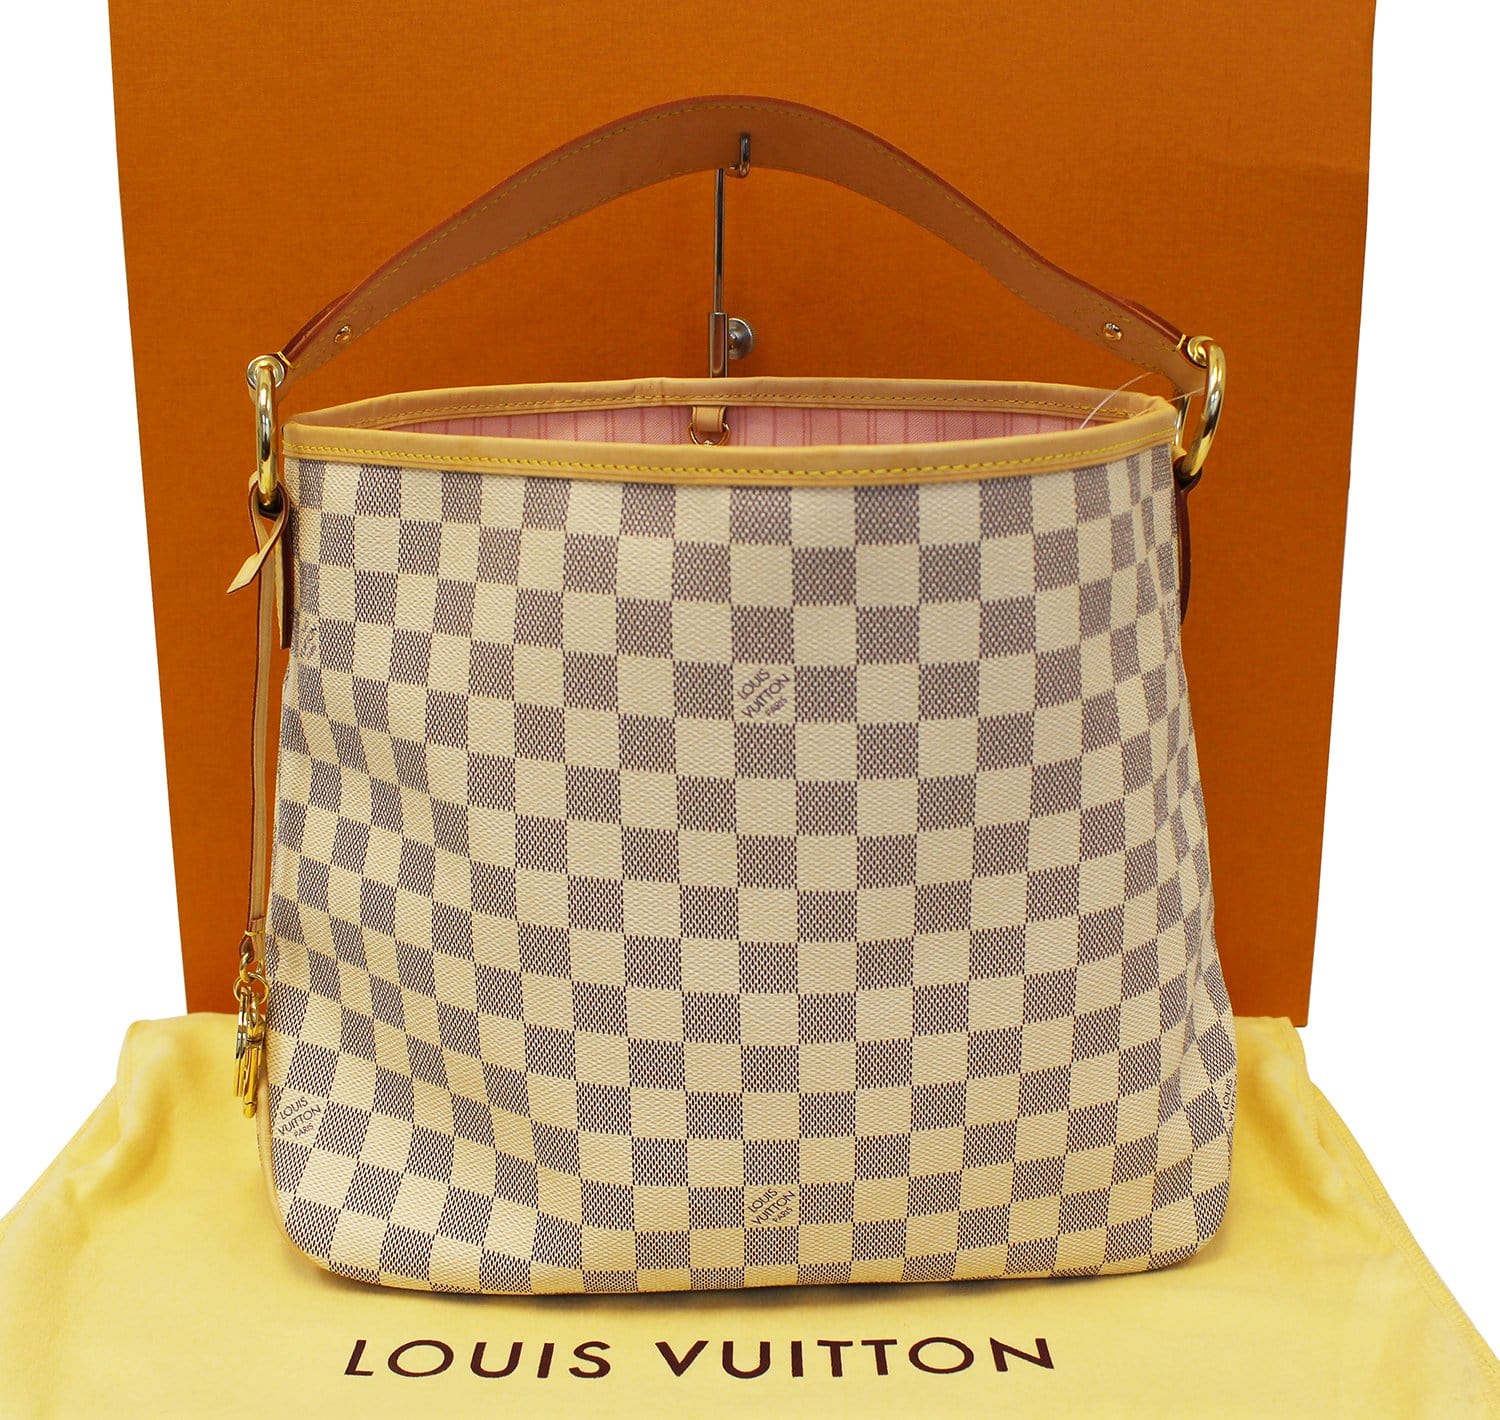 Buy Free Shipping Authentic Pre-owned Louis Vuitton Damier Azur